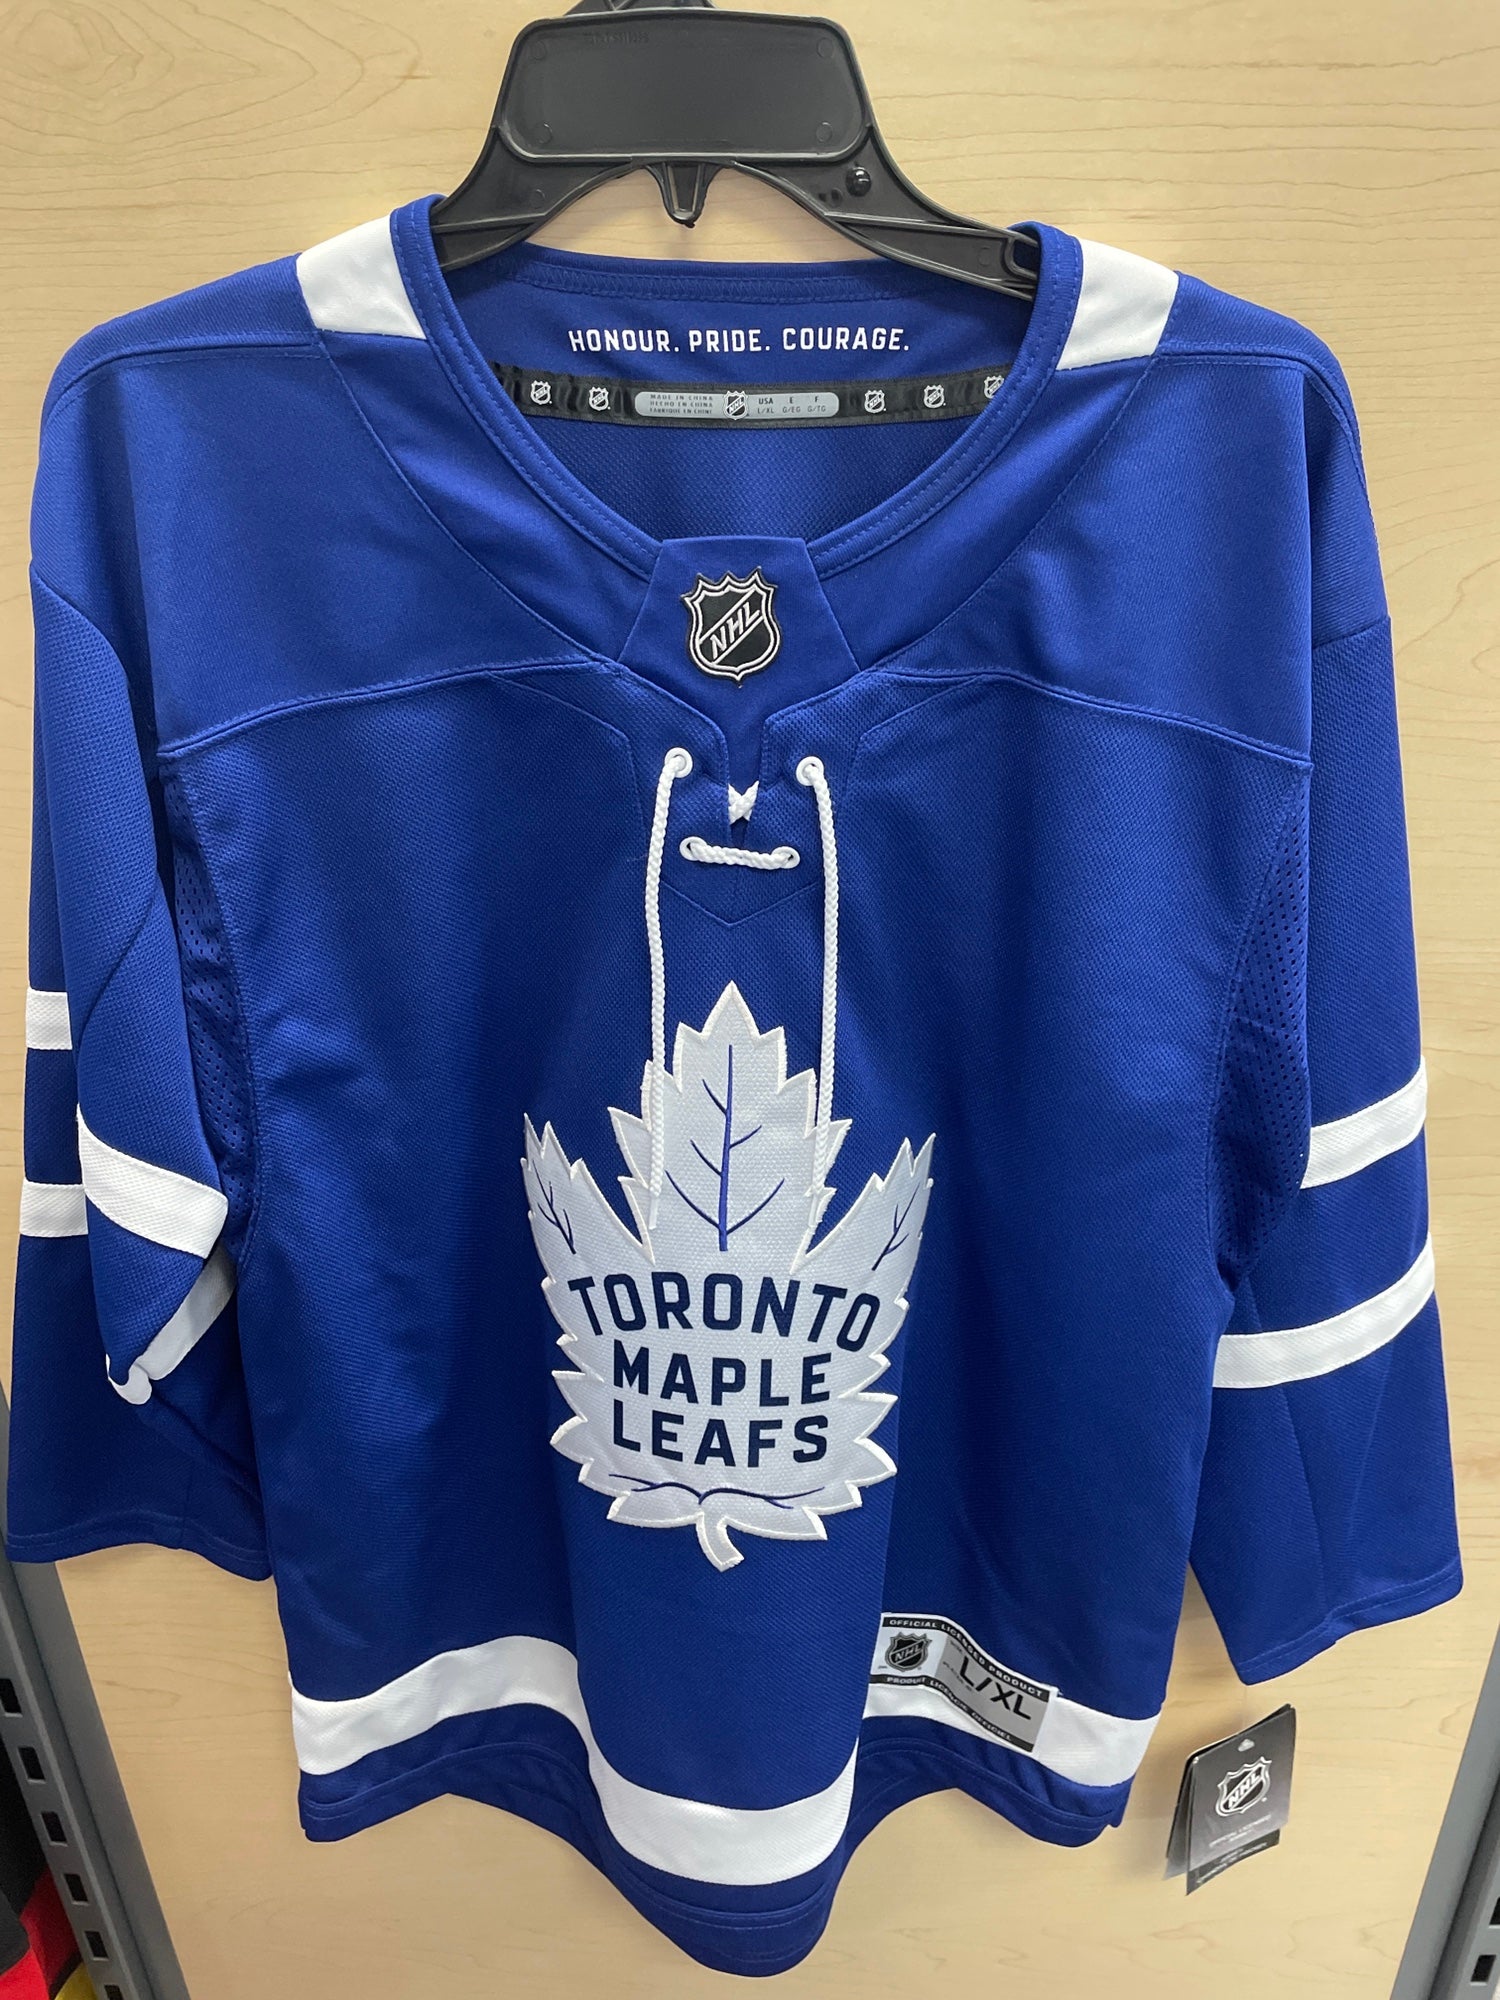 Outerstuff Toronto Maple Leafs NHL Premier Youth Replica NHL Hockey Jersey - Away / S/M